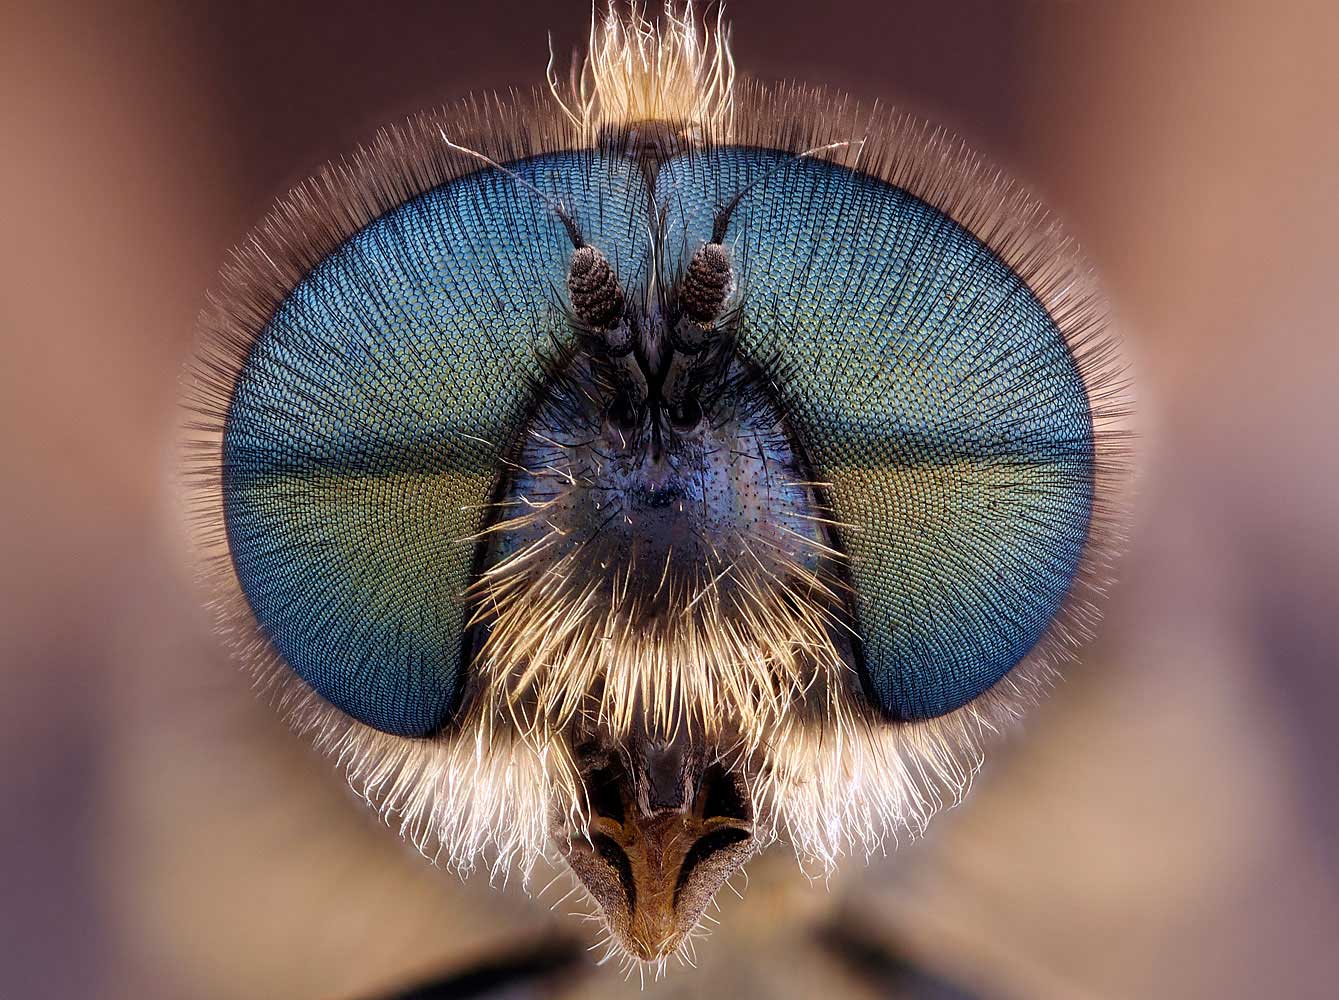 Honorable Mention: Soldier Fly